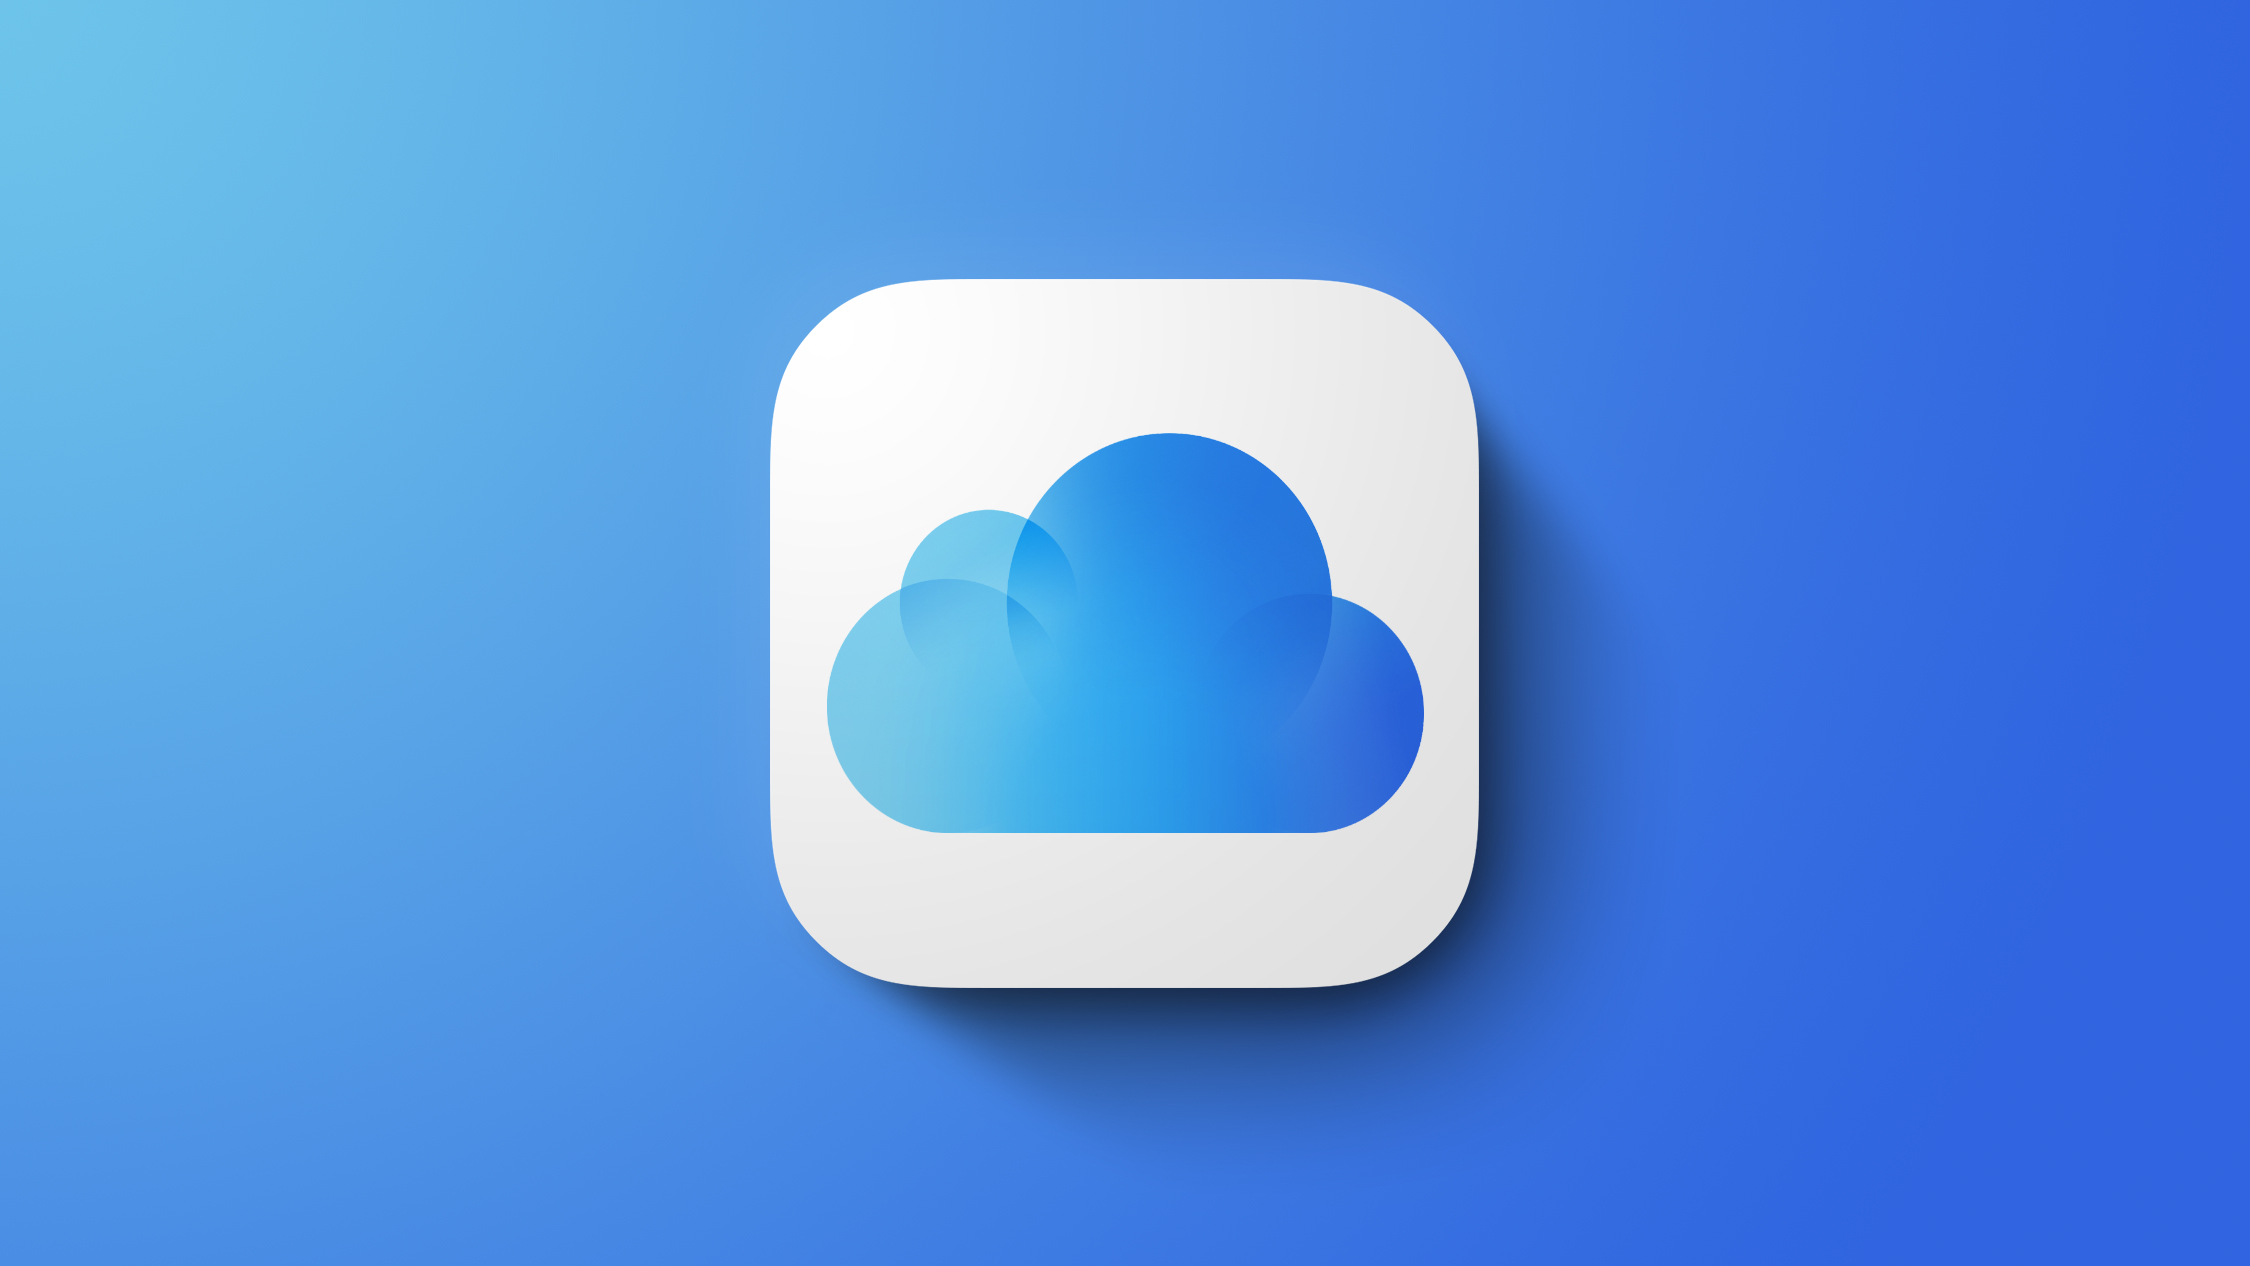 Apple VP Overseeing iCloud, iMessage, and FaceTime Infrastructure Leaving Role